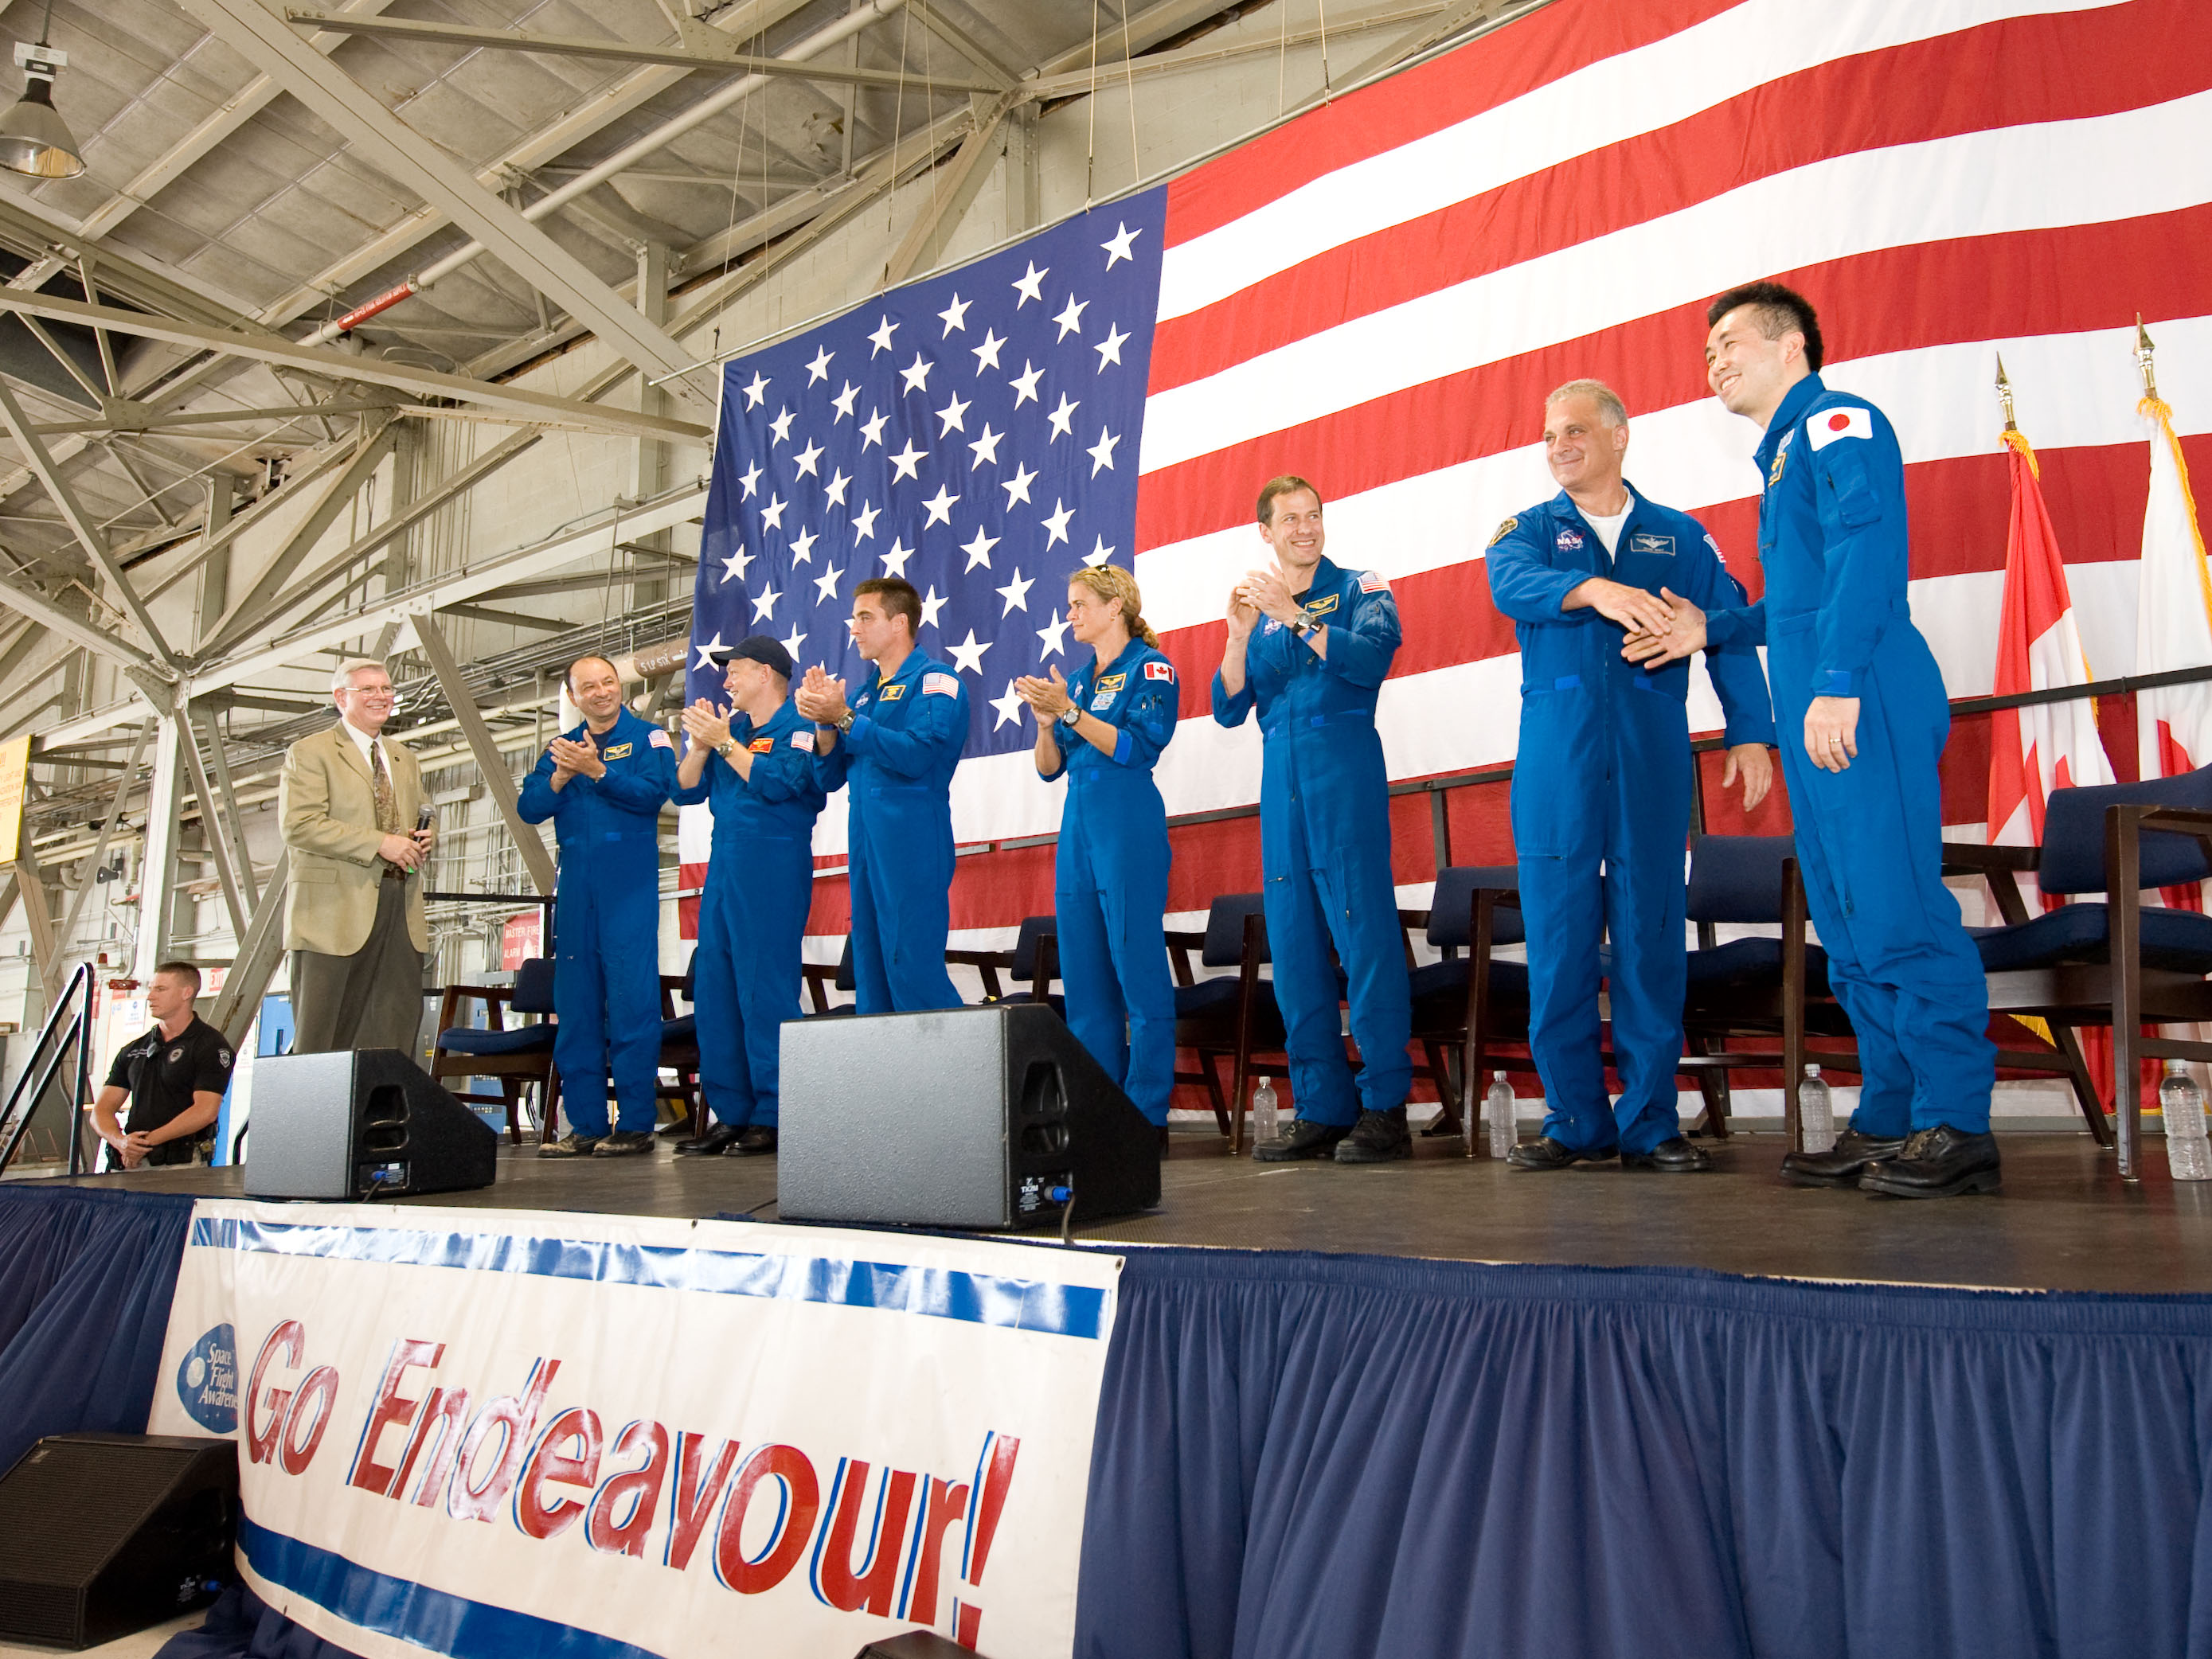 The welcome home ceremony for the STS-127 crew at Ellington Field in Houston